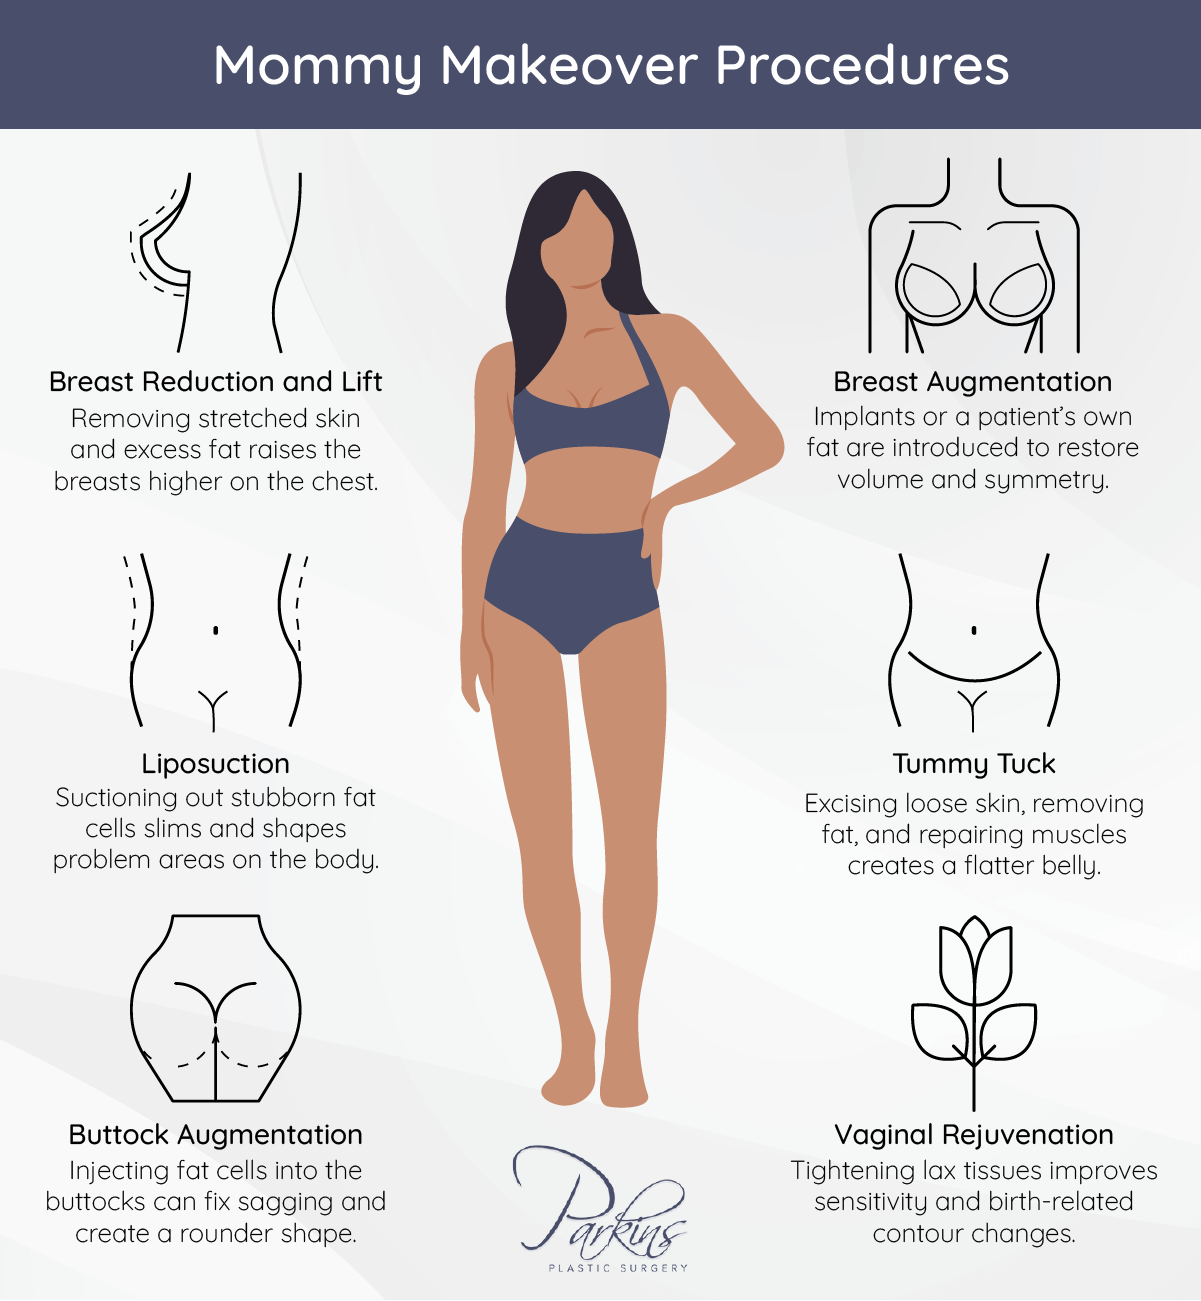 Many procedures may be part of a Mommy Makeover at the Milwaukee area's Parkins Plastic Surgery.